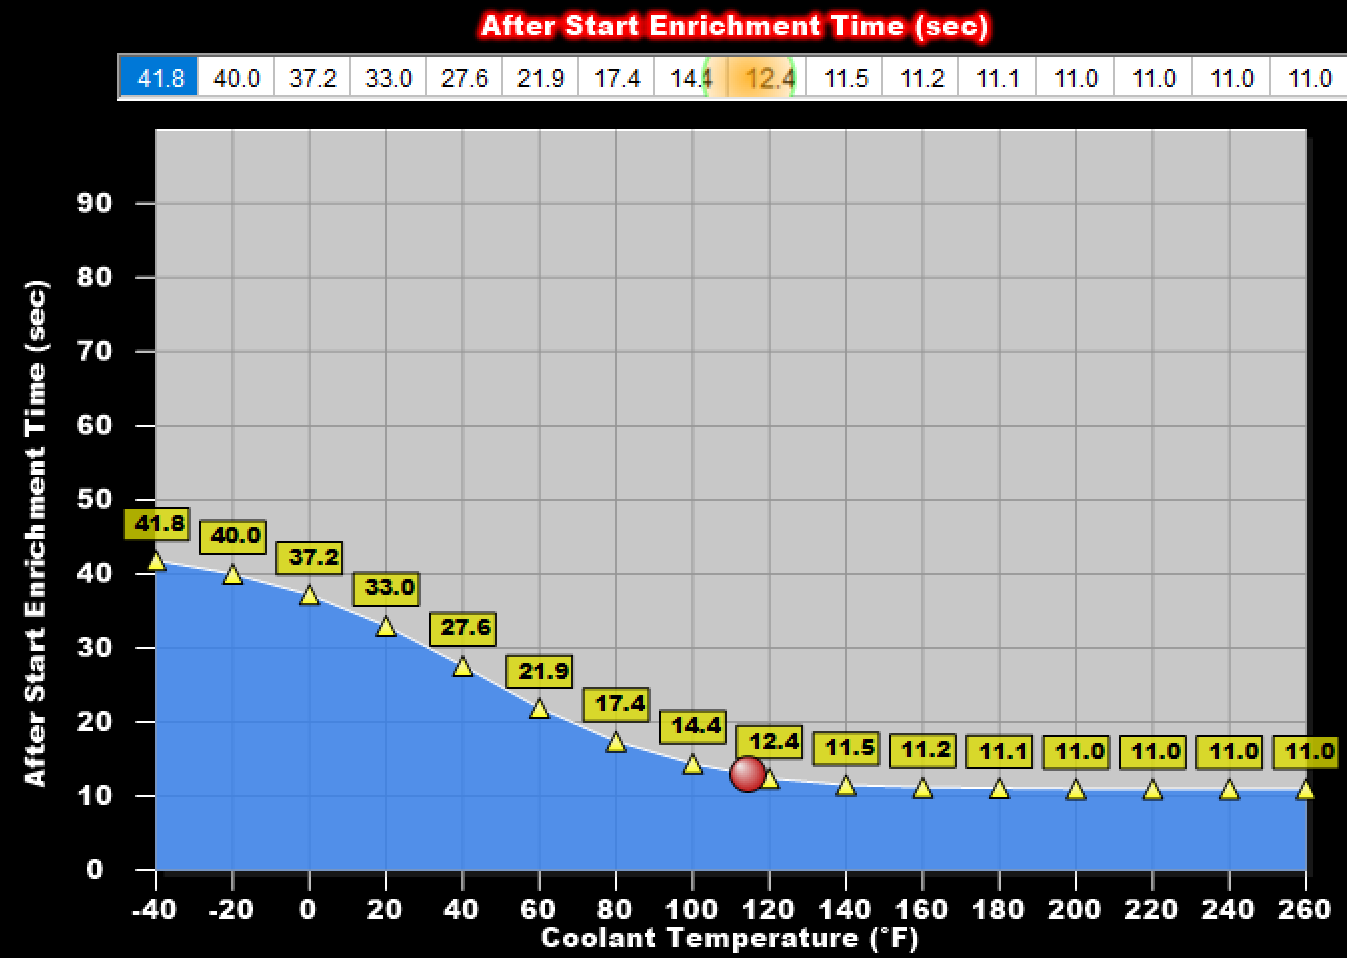 After-Start Enrichment Decay Rate (or Enrichment Time)